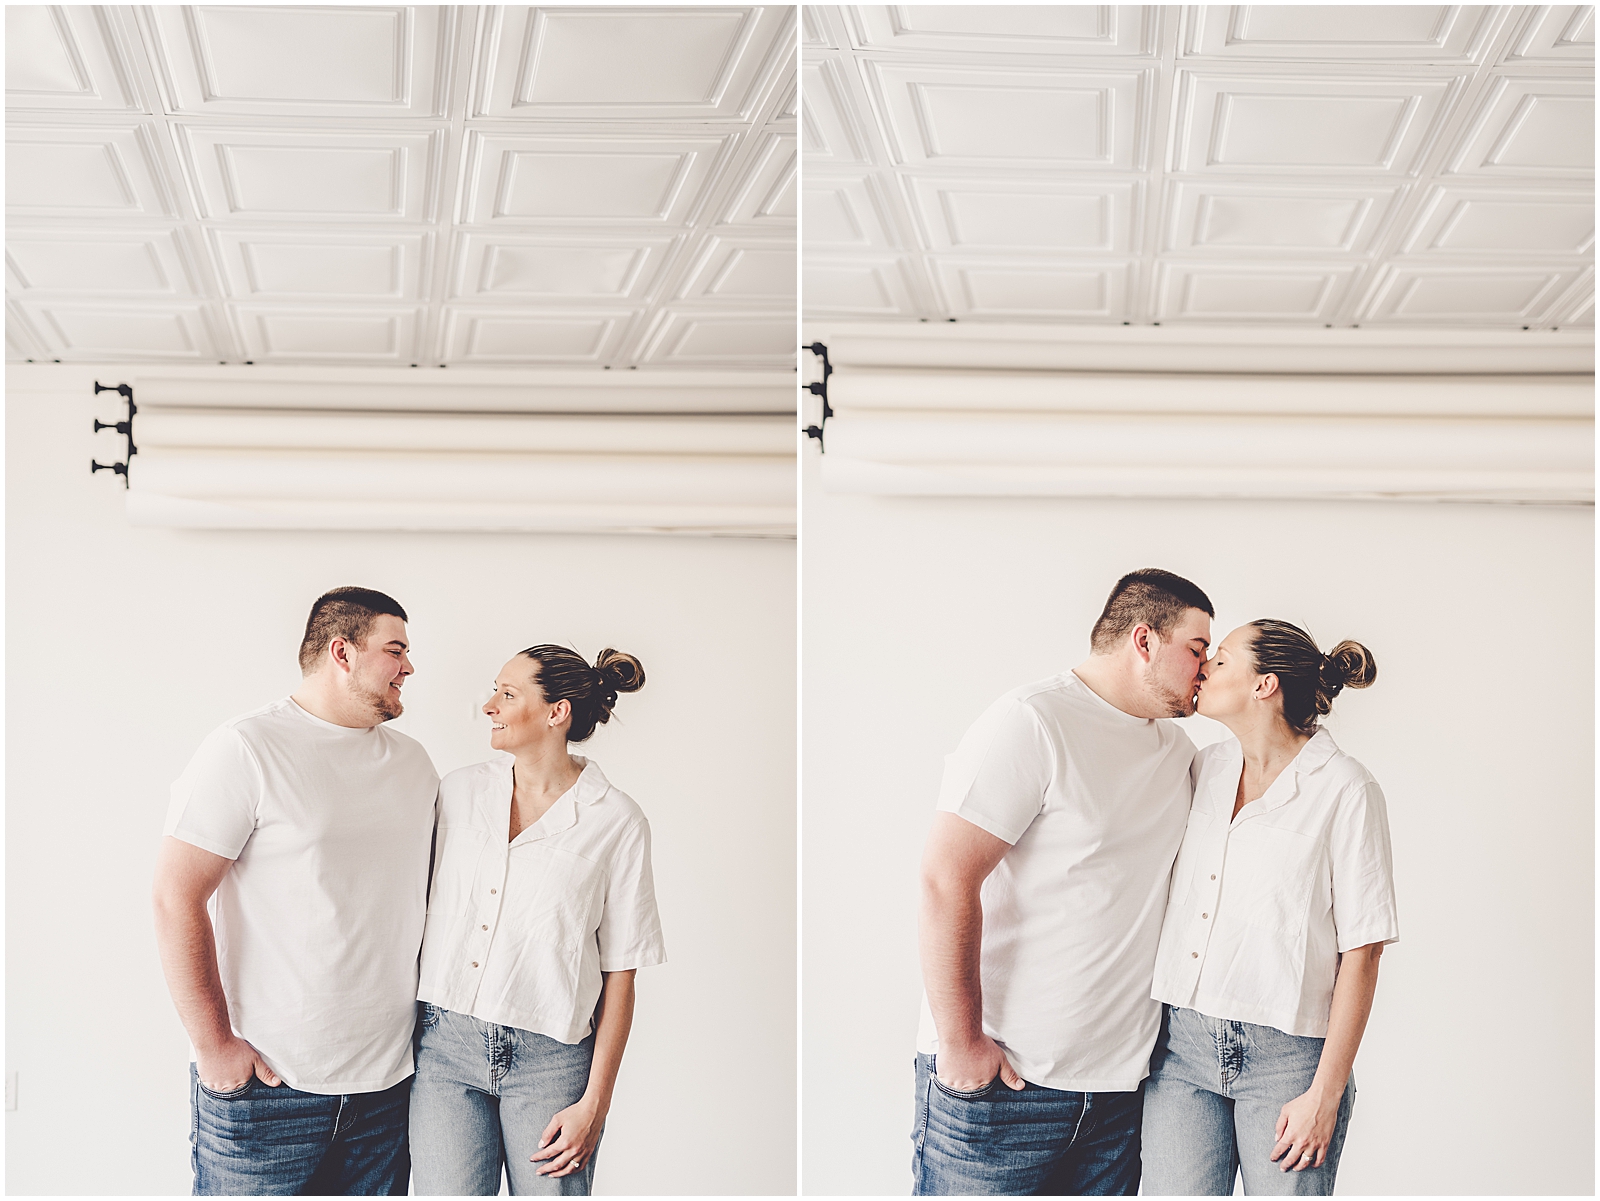 Holly and Kolton's studio couples photo session in Kankakee at natural light Studio 388 with Kara Evans Photographer.